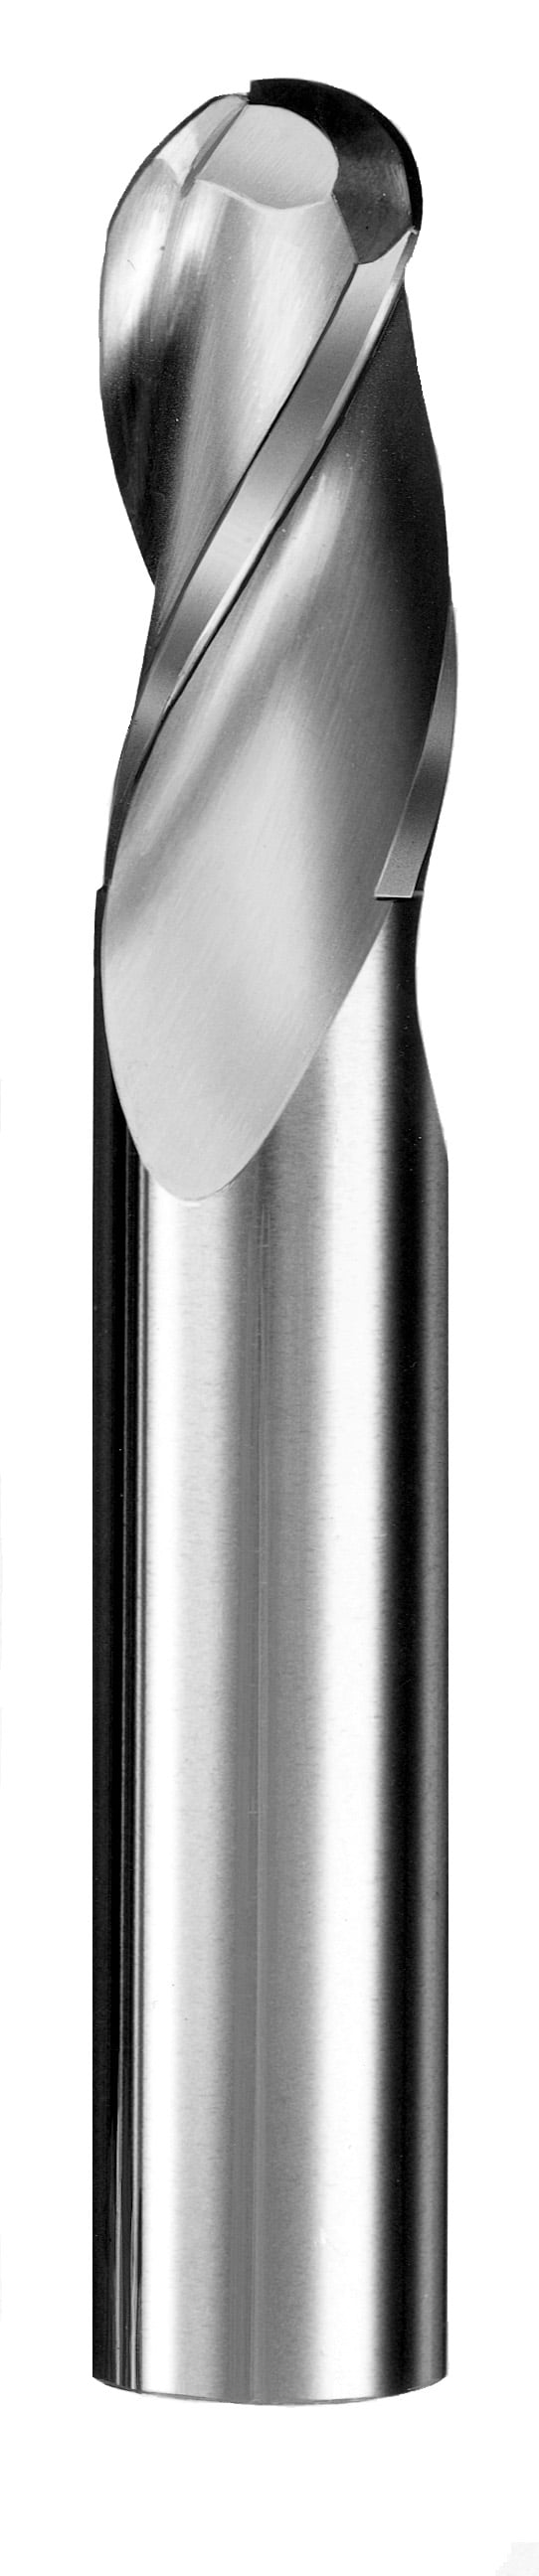 7/16" Dia, 3 Flute, Ball Nose End Mill - 30556